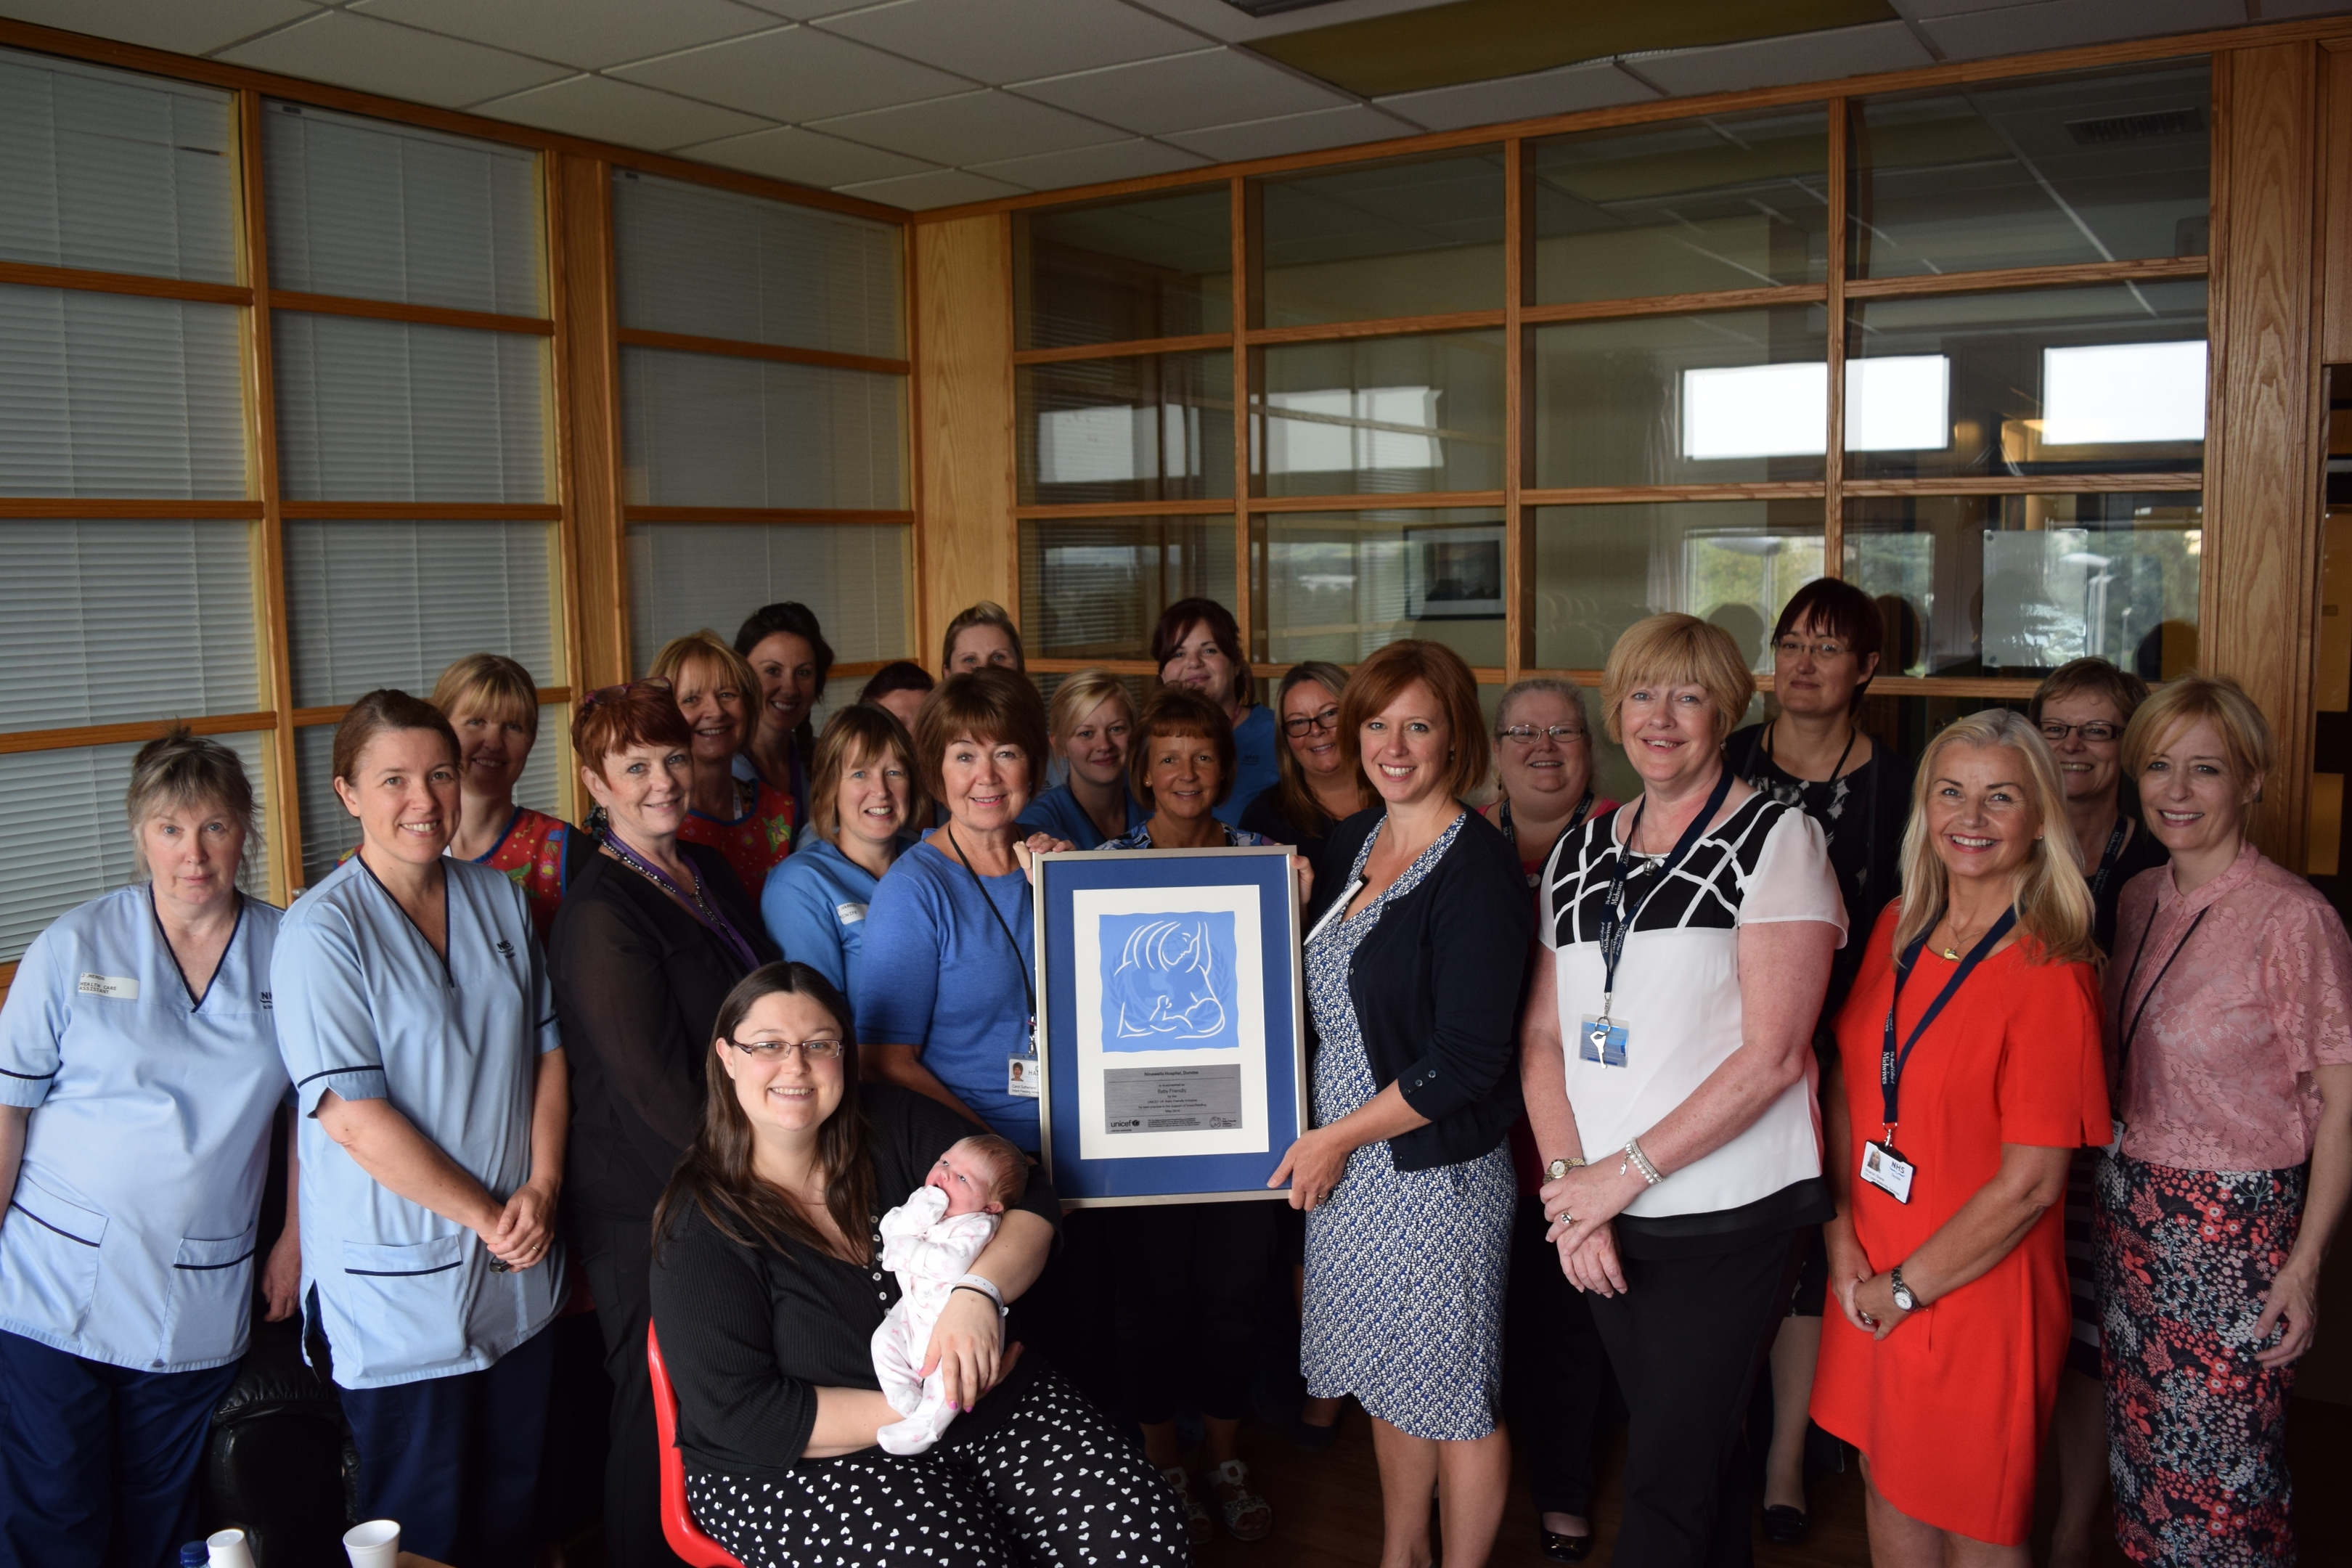 Ninewells maternity department received a Unicef baby friendly award in 2014. Justine Craig, head of midwifery, is holding the award on the right hand side.